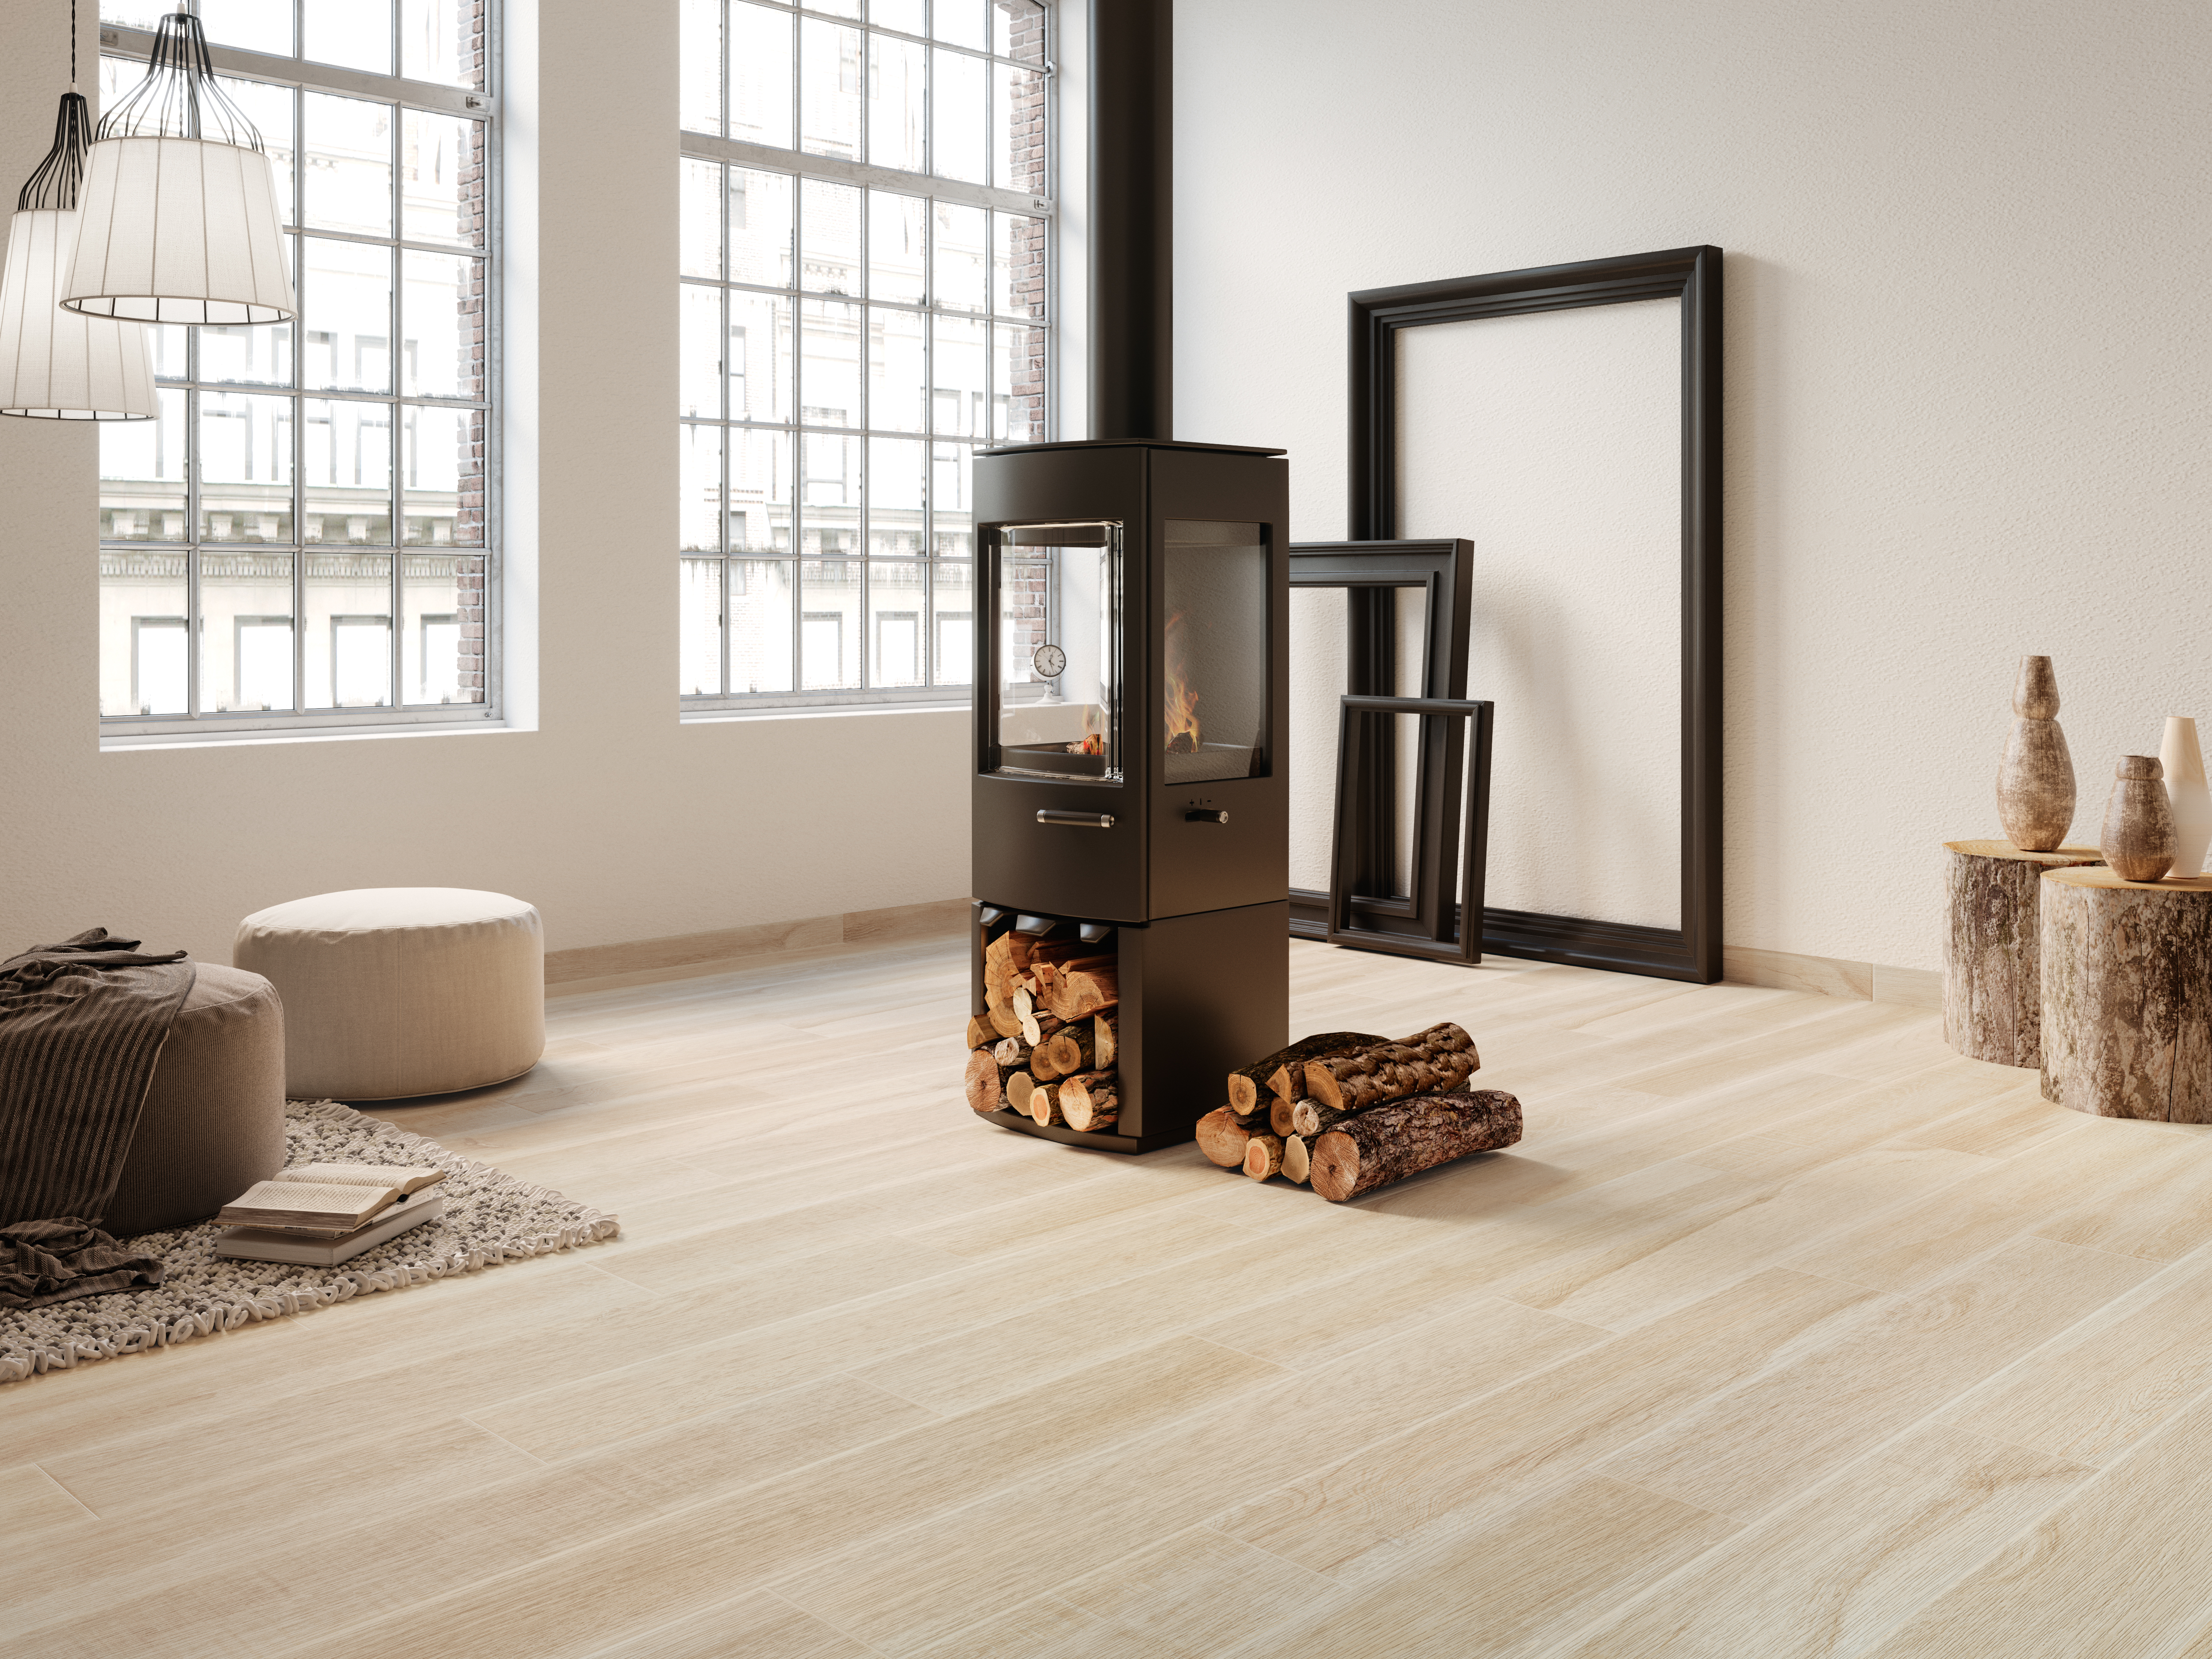 Wood-Look Emser Tile in contemporary rustic apartment living room featuring pellet stove at center of the room